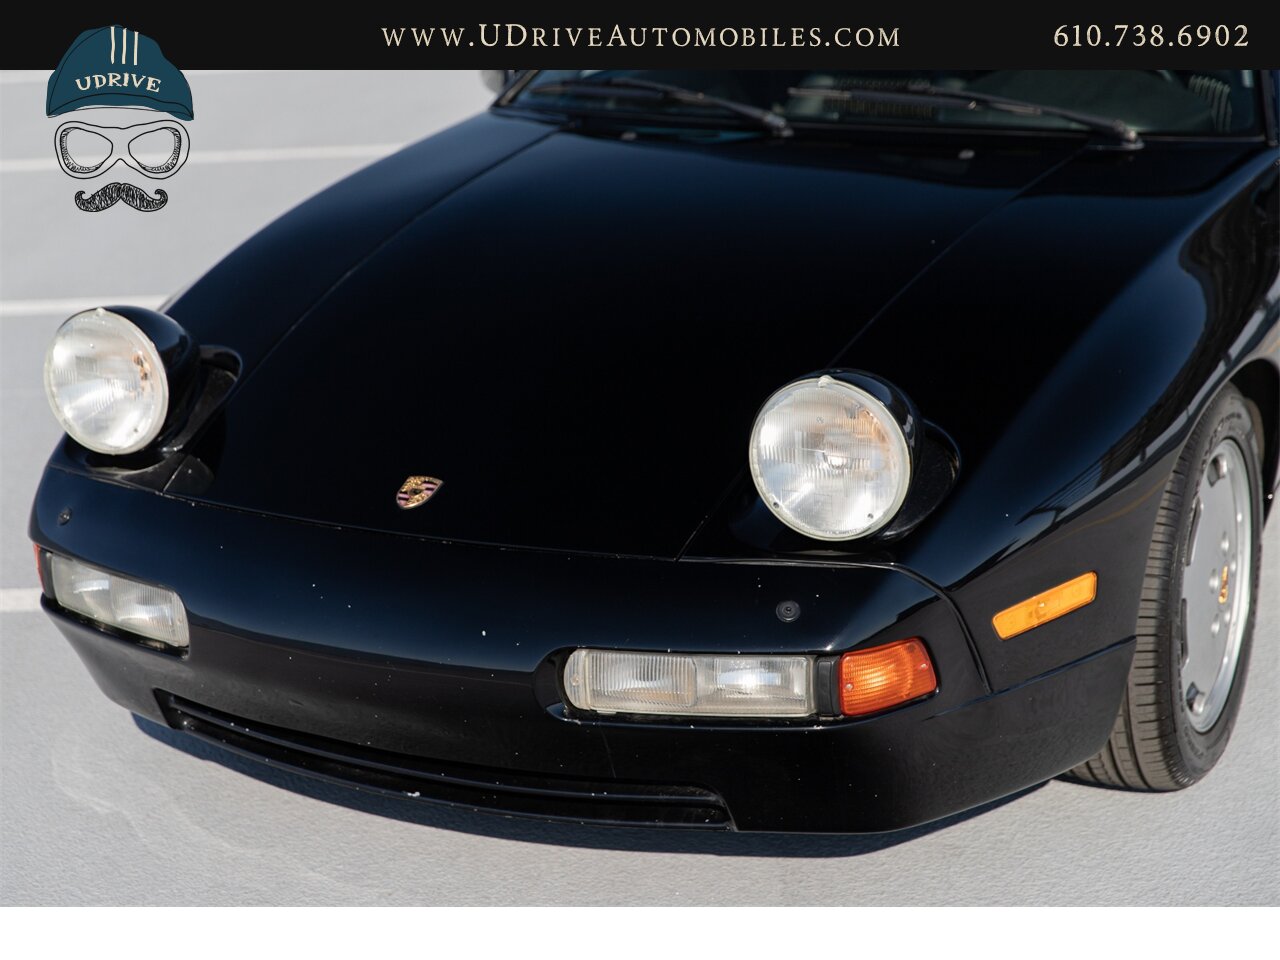 1990 Porsche 928 S4 $58k in Service History Since 2014   - Photo 9 - West Chester, PA 19382